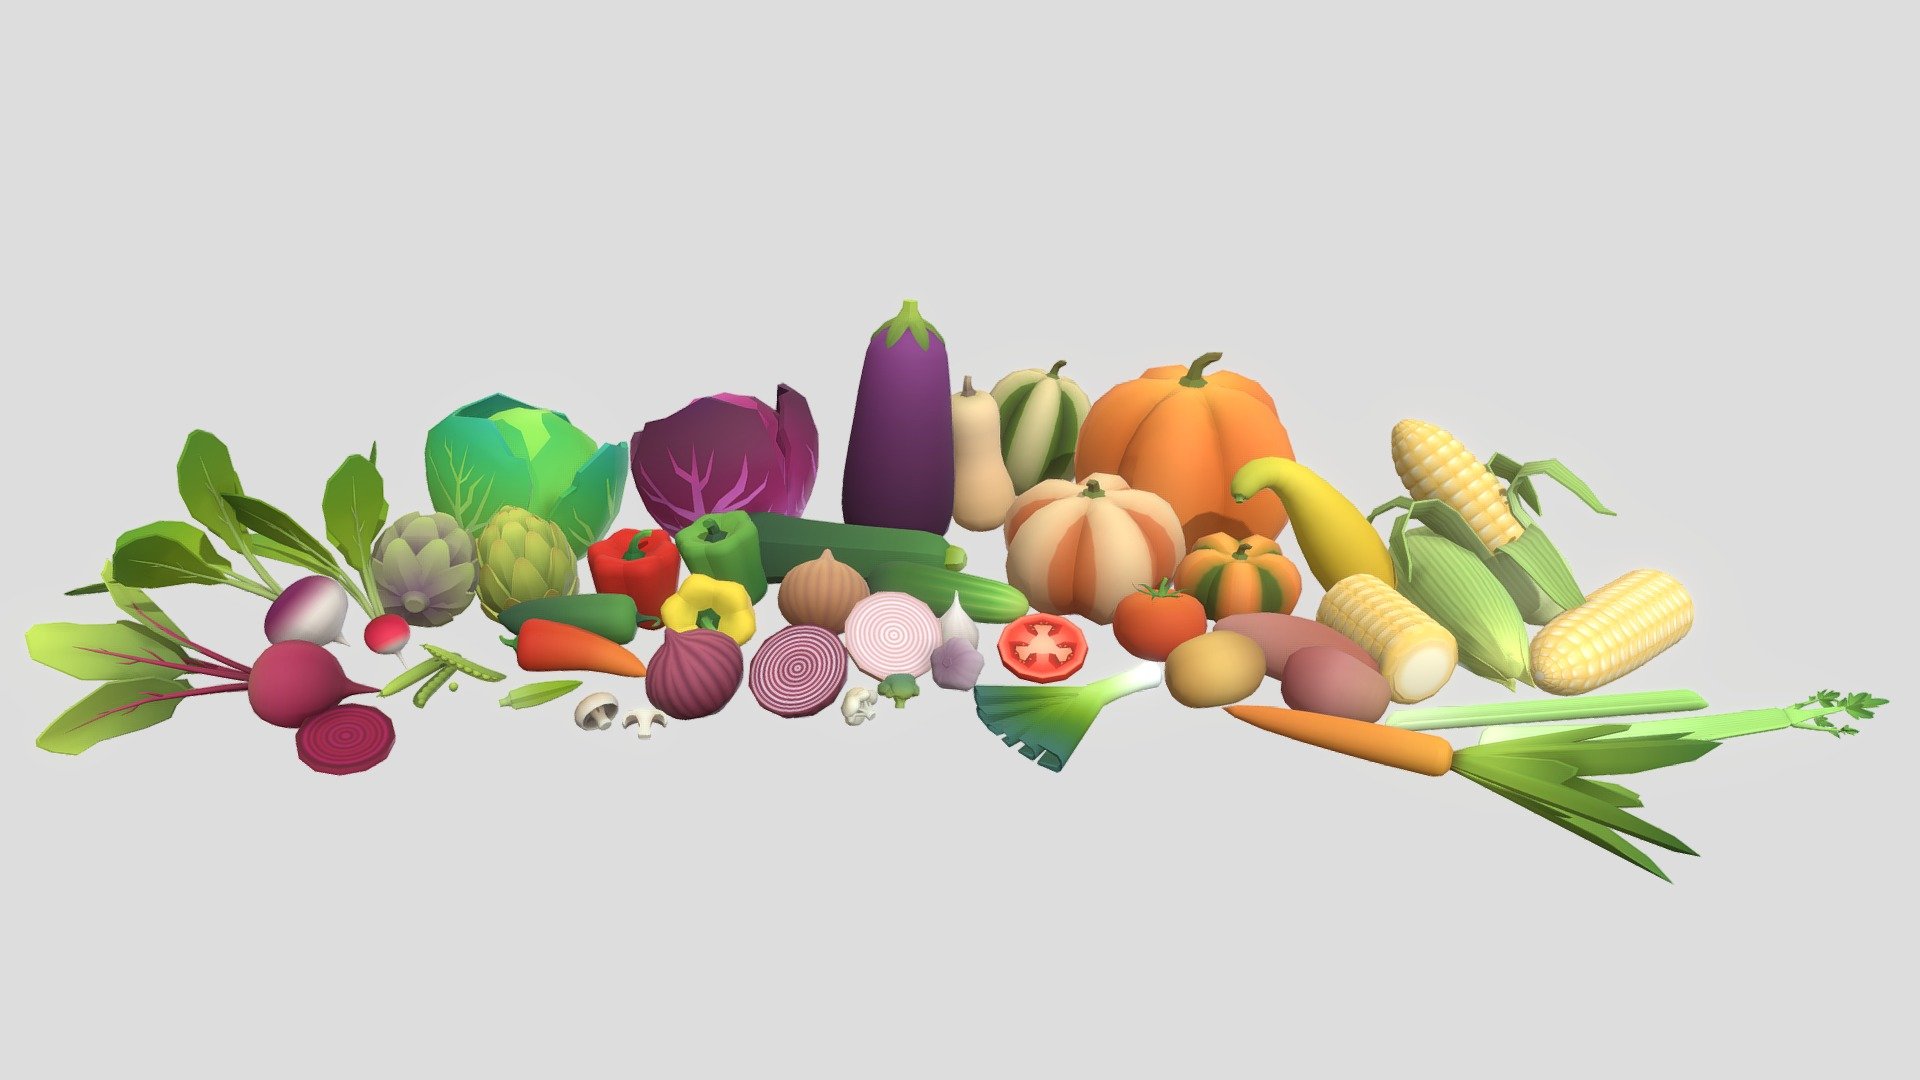 This is a stylized collection of vegetables (and some fruit) that can be used in anything from low-poly mobile games to graphic design. Models range from 200 tris/100 faces to the largest model being 3000 tris/1500 faces. Model scale is in centimeters. Texture is a single 1024 x 1024 palette map that all models share, avaliable in PNG, JPEG, and Targa.

This pack contains:

28 Vegetables:




Artichoke (green/purple)

Beet

Bell Pepper (red/yellow/green)

Broccoli

Butternut Squash

Cabbage (green/red)

Carrot

Cauliflower

Celery

Corn

Crookneck Squash

Cucumber

Eggplant

Fresno Pepper

Garlic (white/purple)

Jalapeno Pepper

Leek

Mushroom

Okra

Onion (yellow/red)

Pea

Potato (brown/purple)

Pumpkin (orange/striped)

Radish

Sweet Potato

Tomato

Turnip

Zucchini

50 Meshs:




38 Whole Vegetables

3 Halves

3 Slices

6 Other

1 Texture map - Low Poly Vegetables - Buy Royalty Free 3D model by erf-3Dmodels 3d model